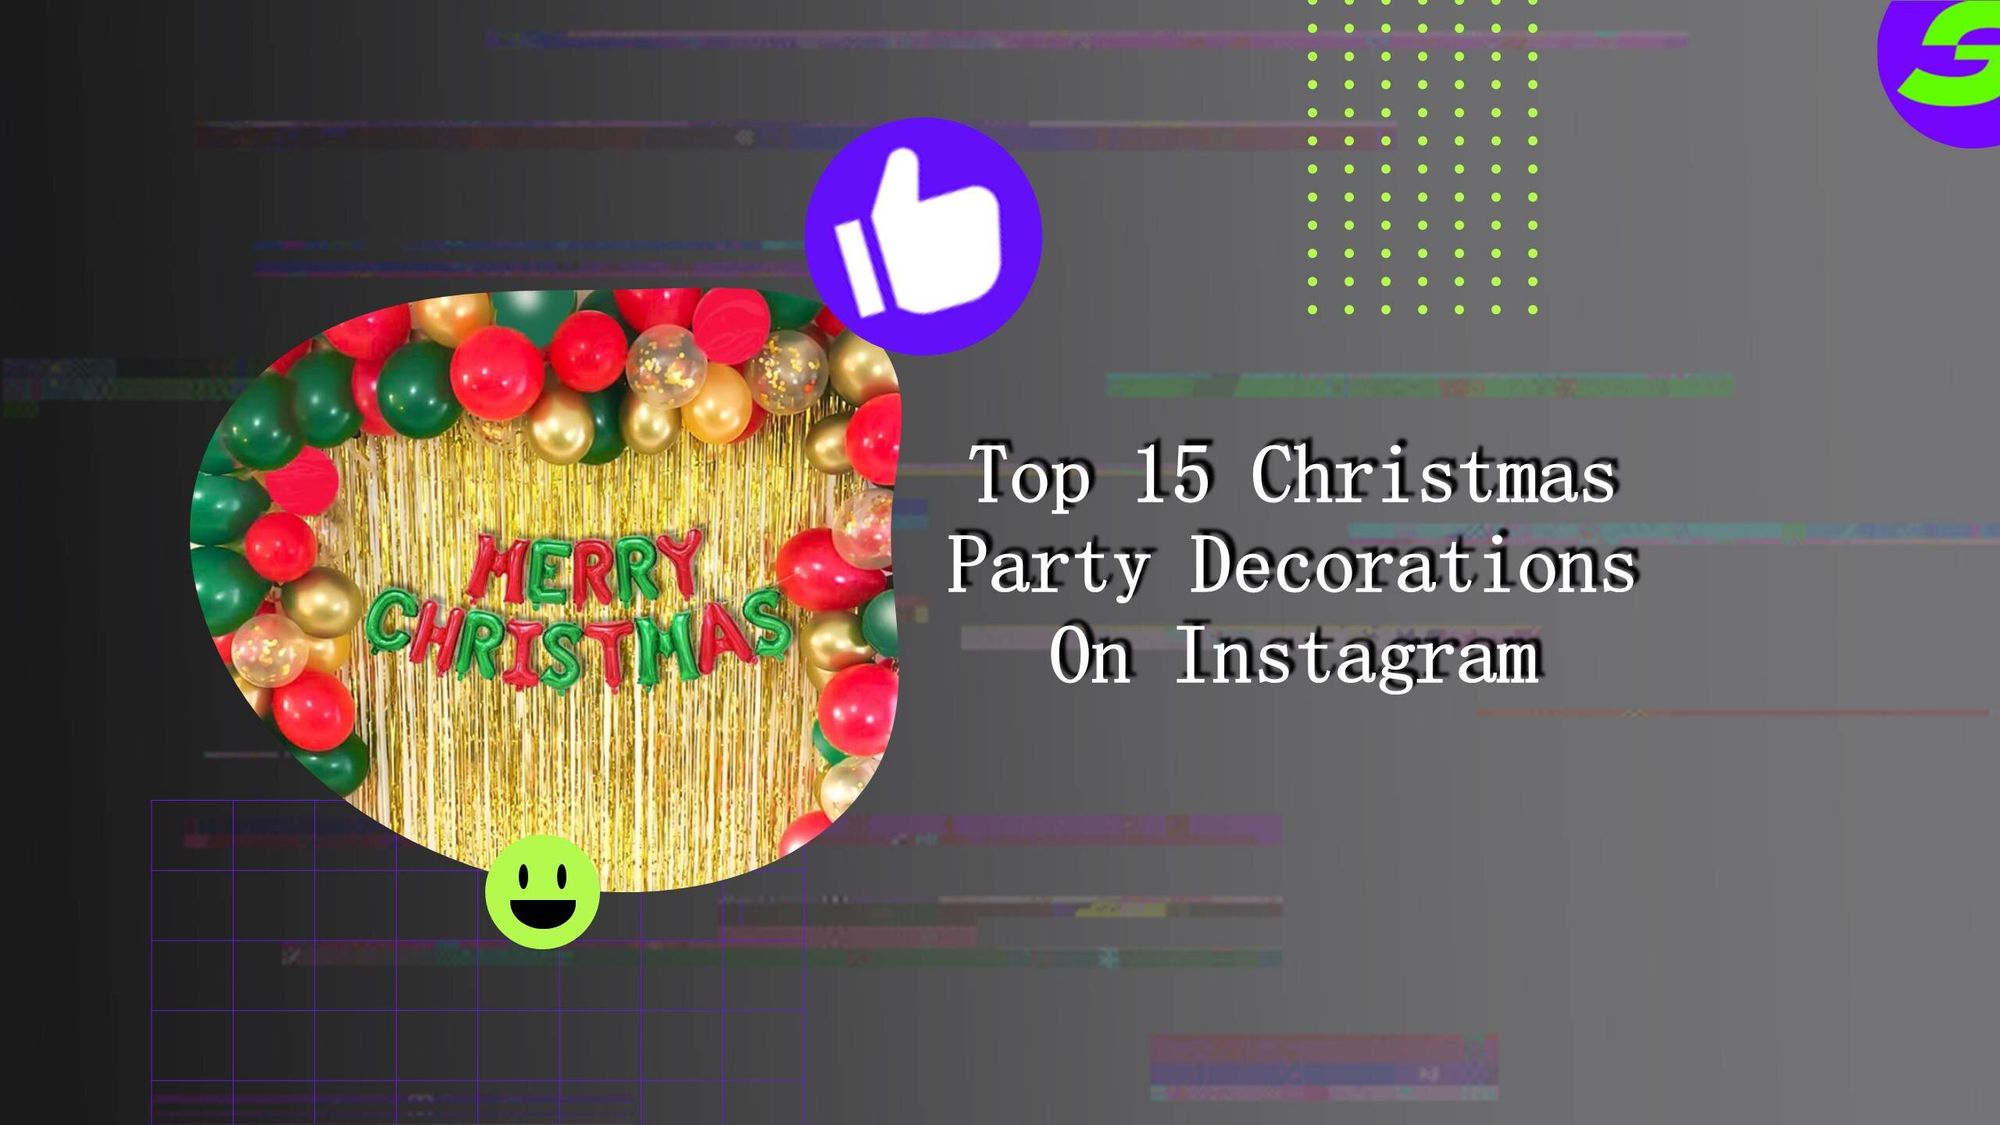 Best ideas for Christmas Party Decorations ShotCut free Android video editor 